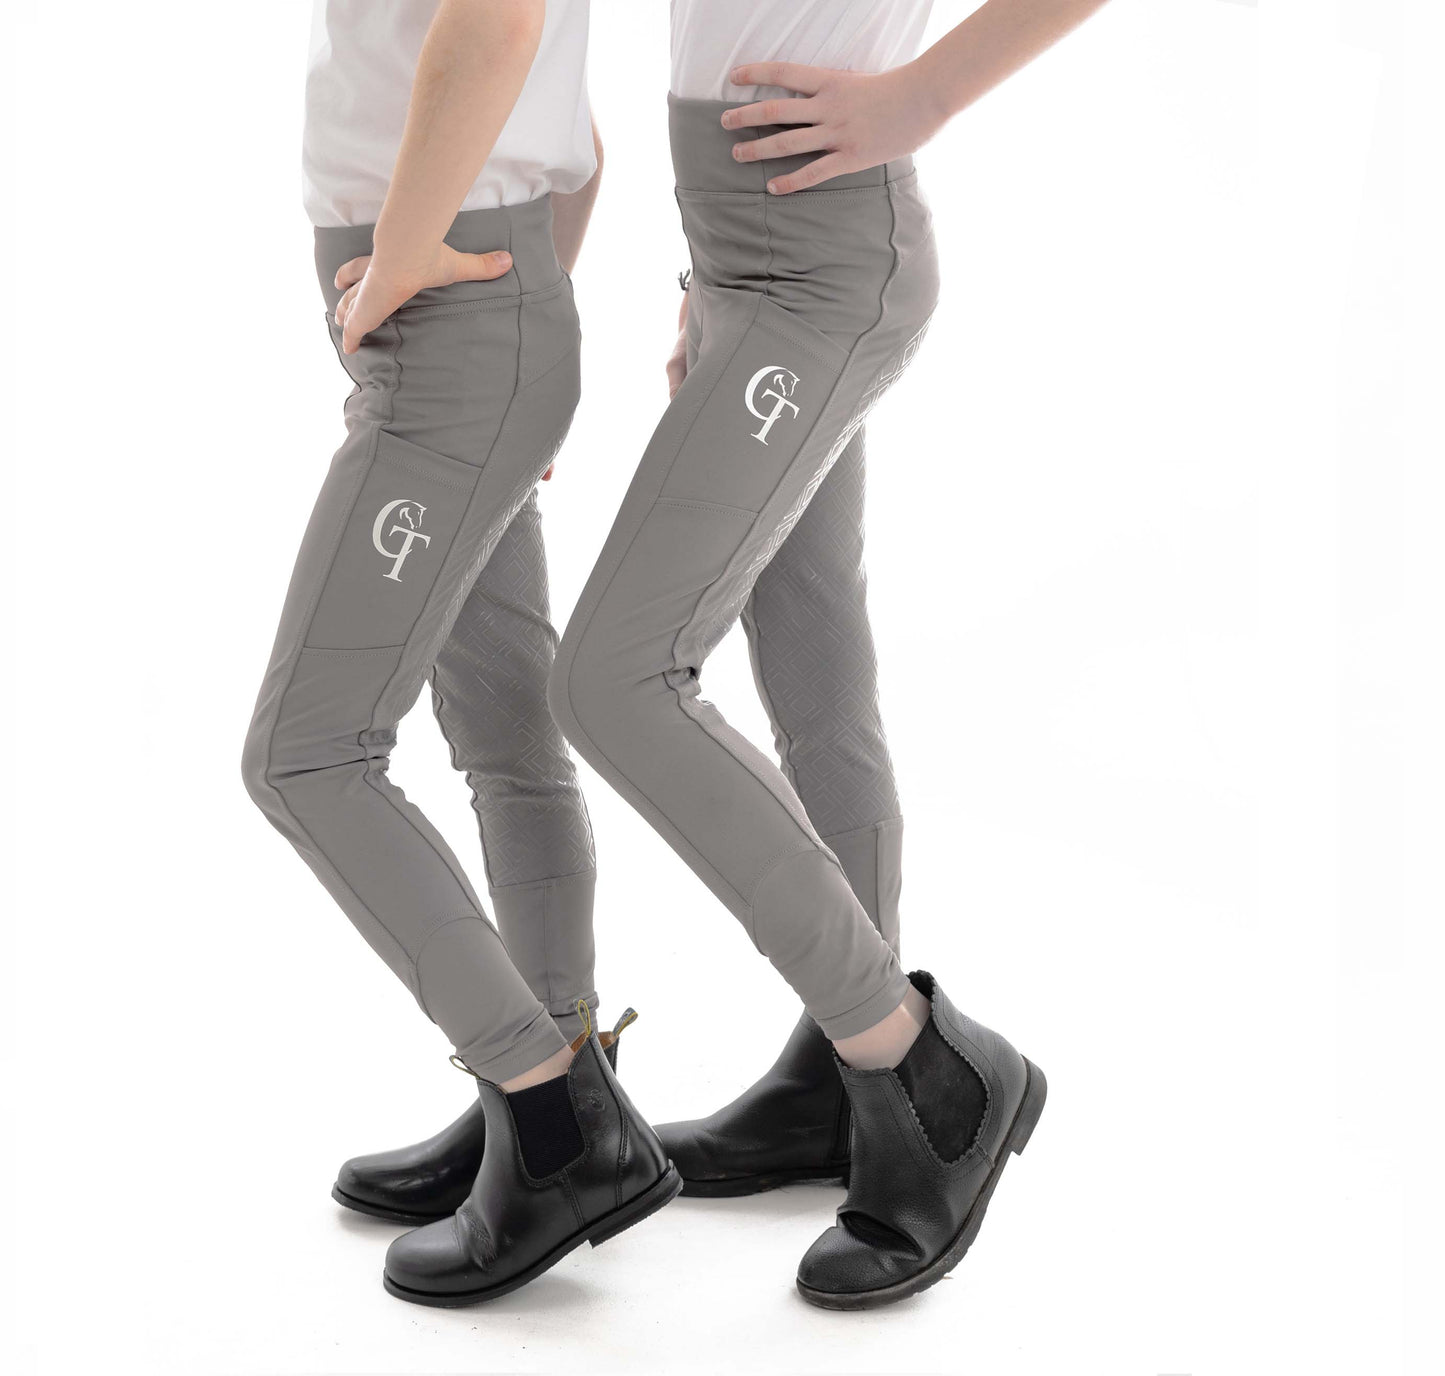 Shop Childrens Riding Leggings at CT Equine Collection